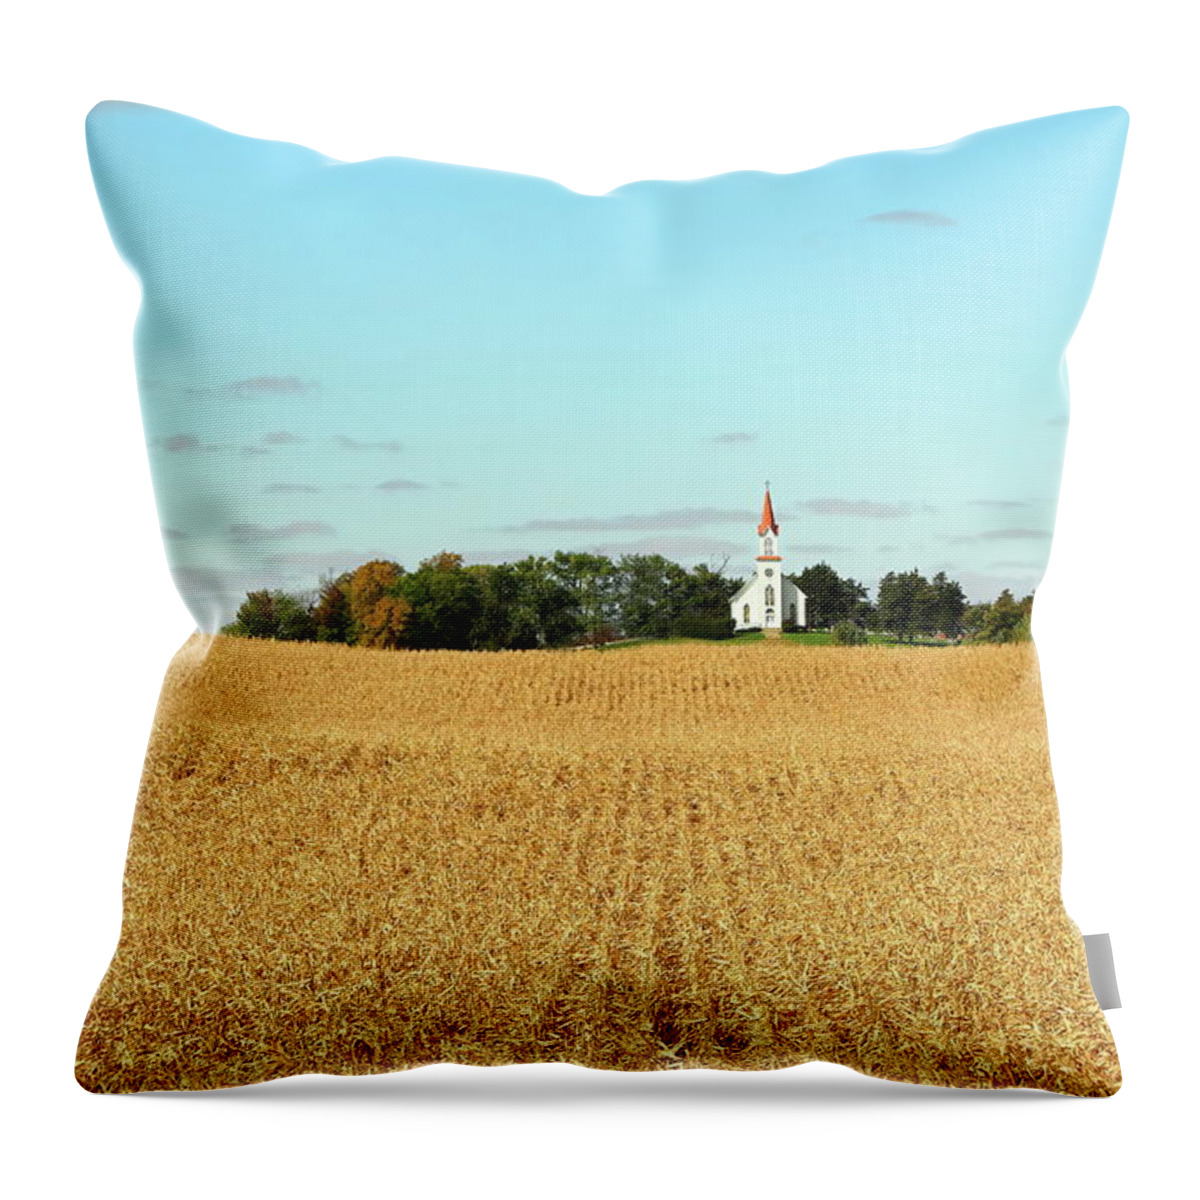 Church Throw Pillow featuring the photograph Country Church by Lens Art Photography By Larry Trager